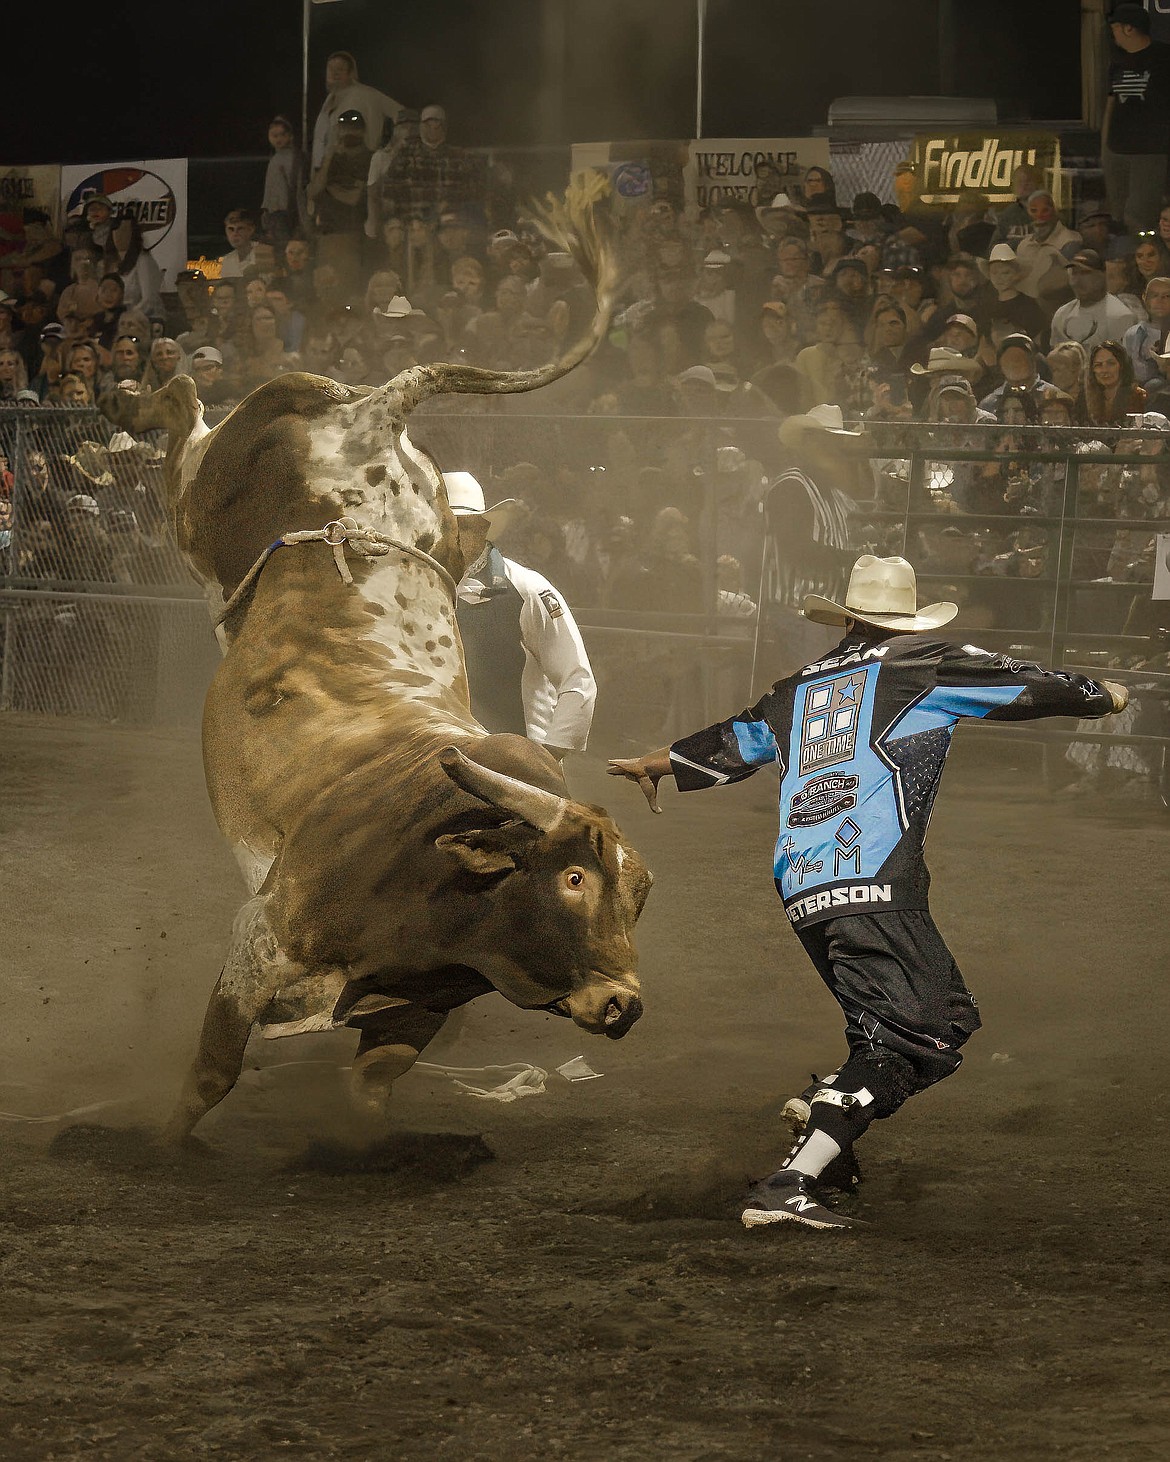 A bull kicks up its hooves Thursday during the Xtreme Bulls during the Gem State Stampede at the North Idaho State Fair.